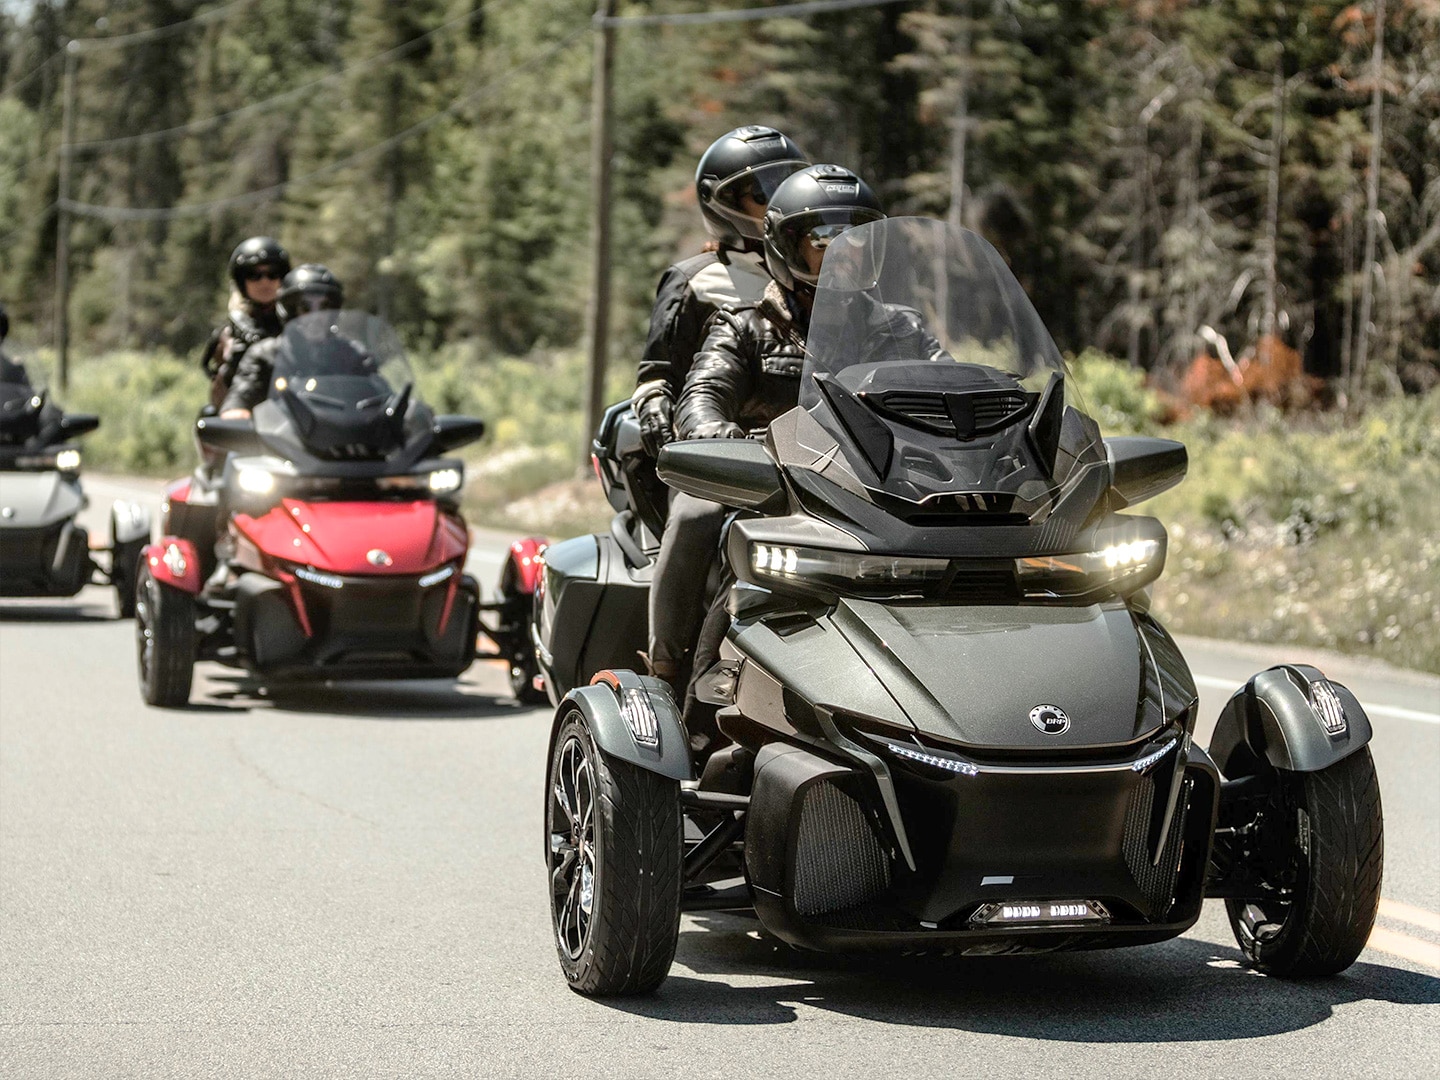 Riders with their Can-am three-wheel motorcycle